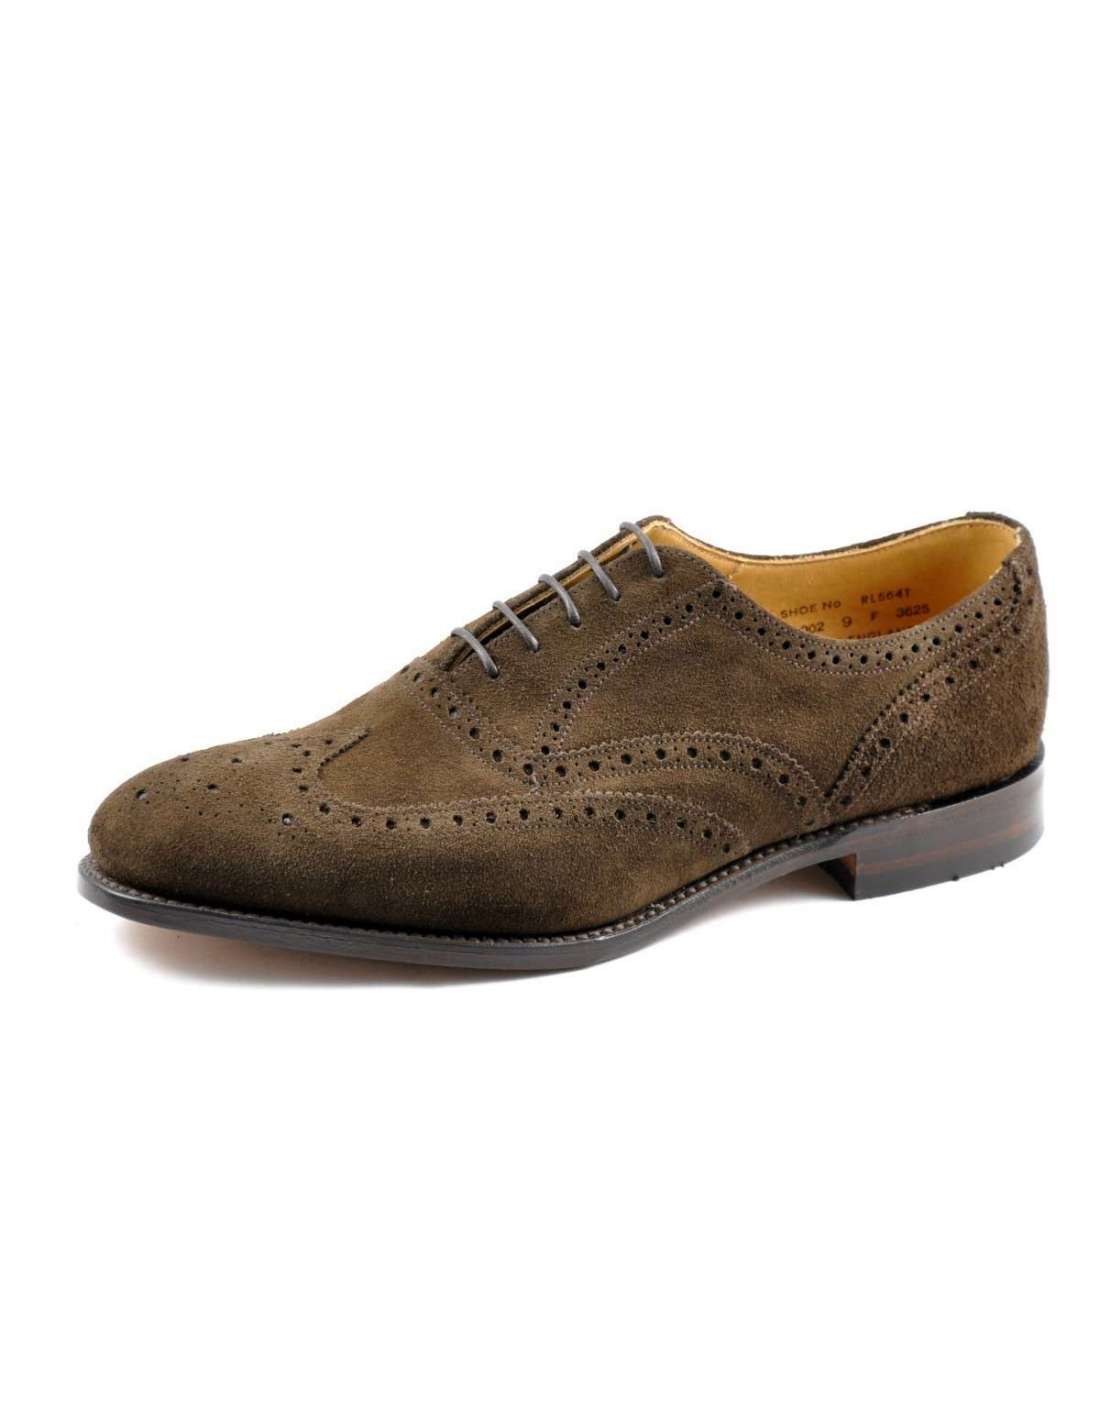 758 oxford shoes by Loake Shoemakers